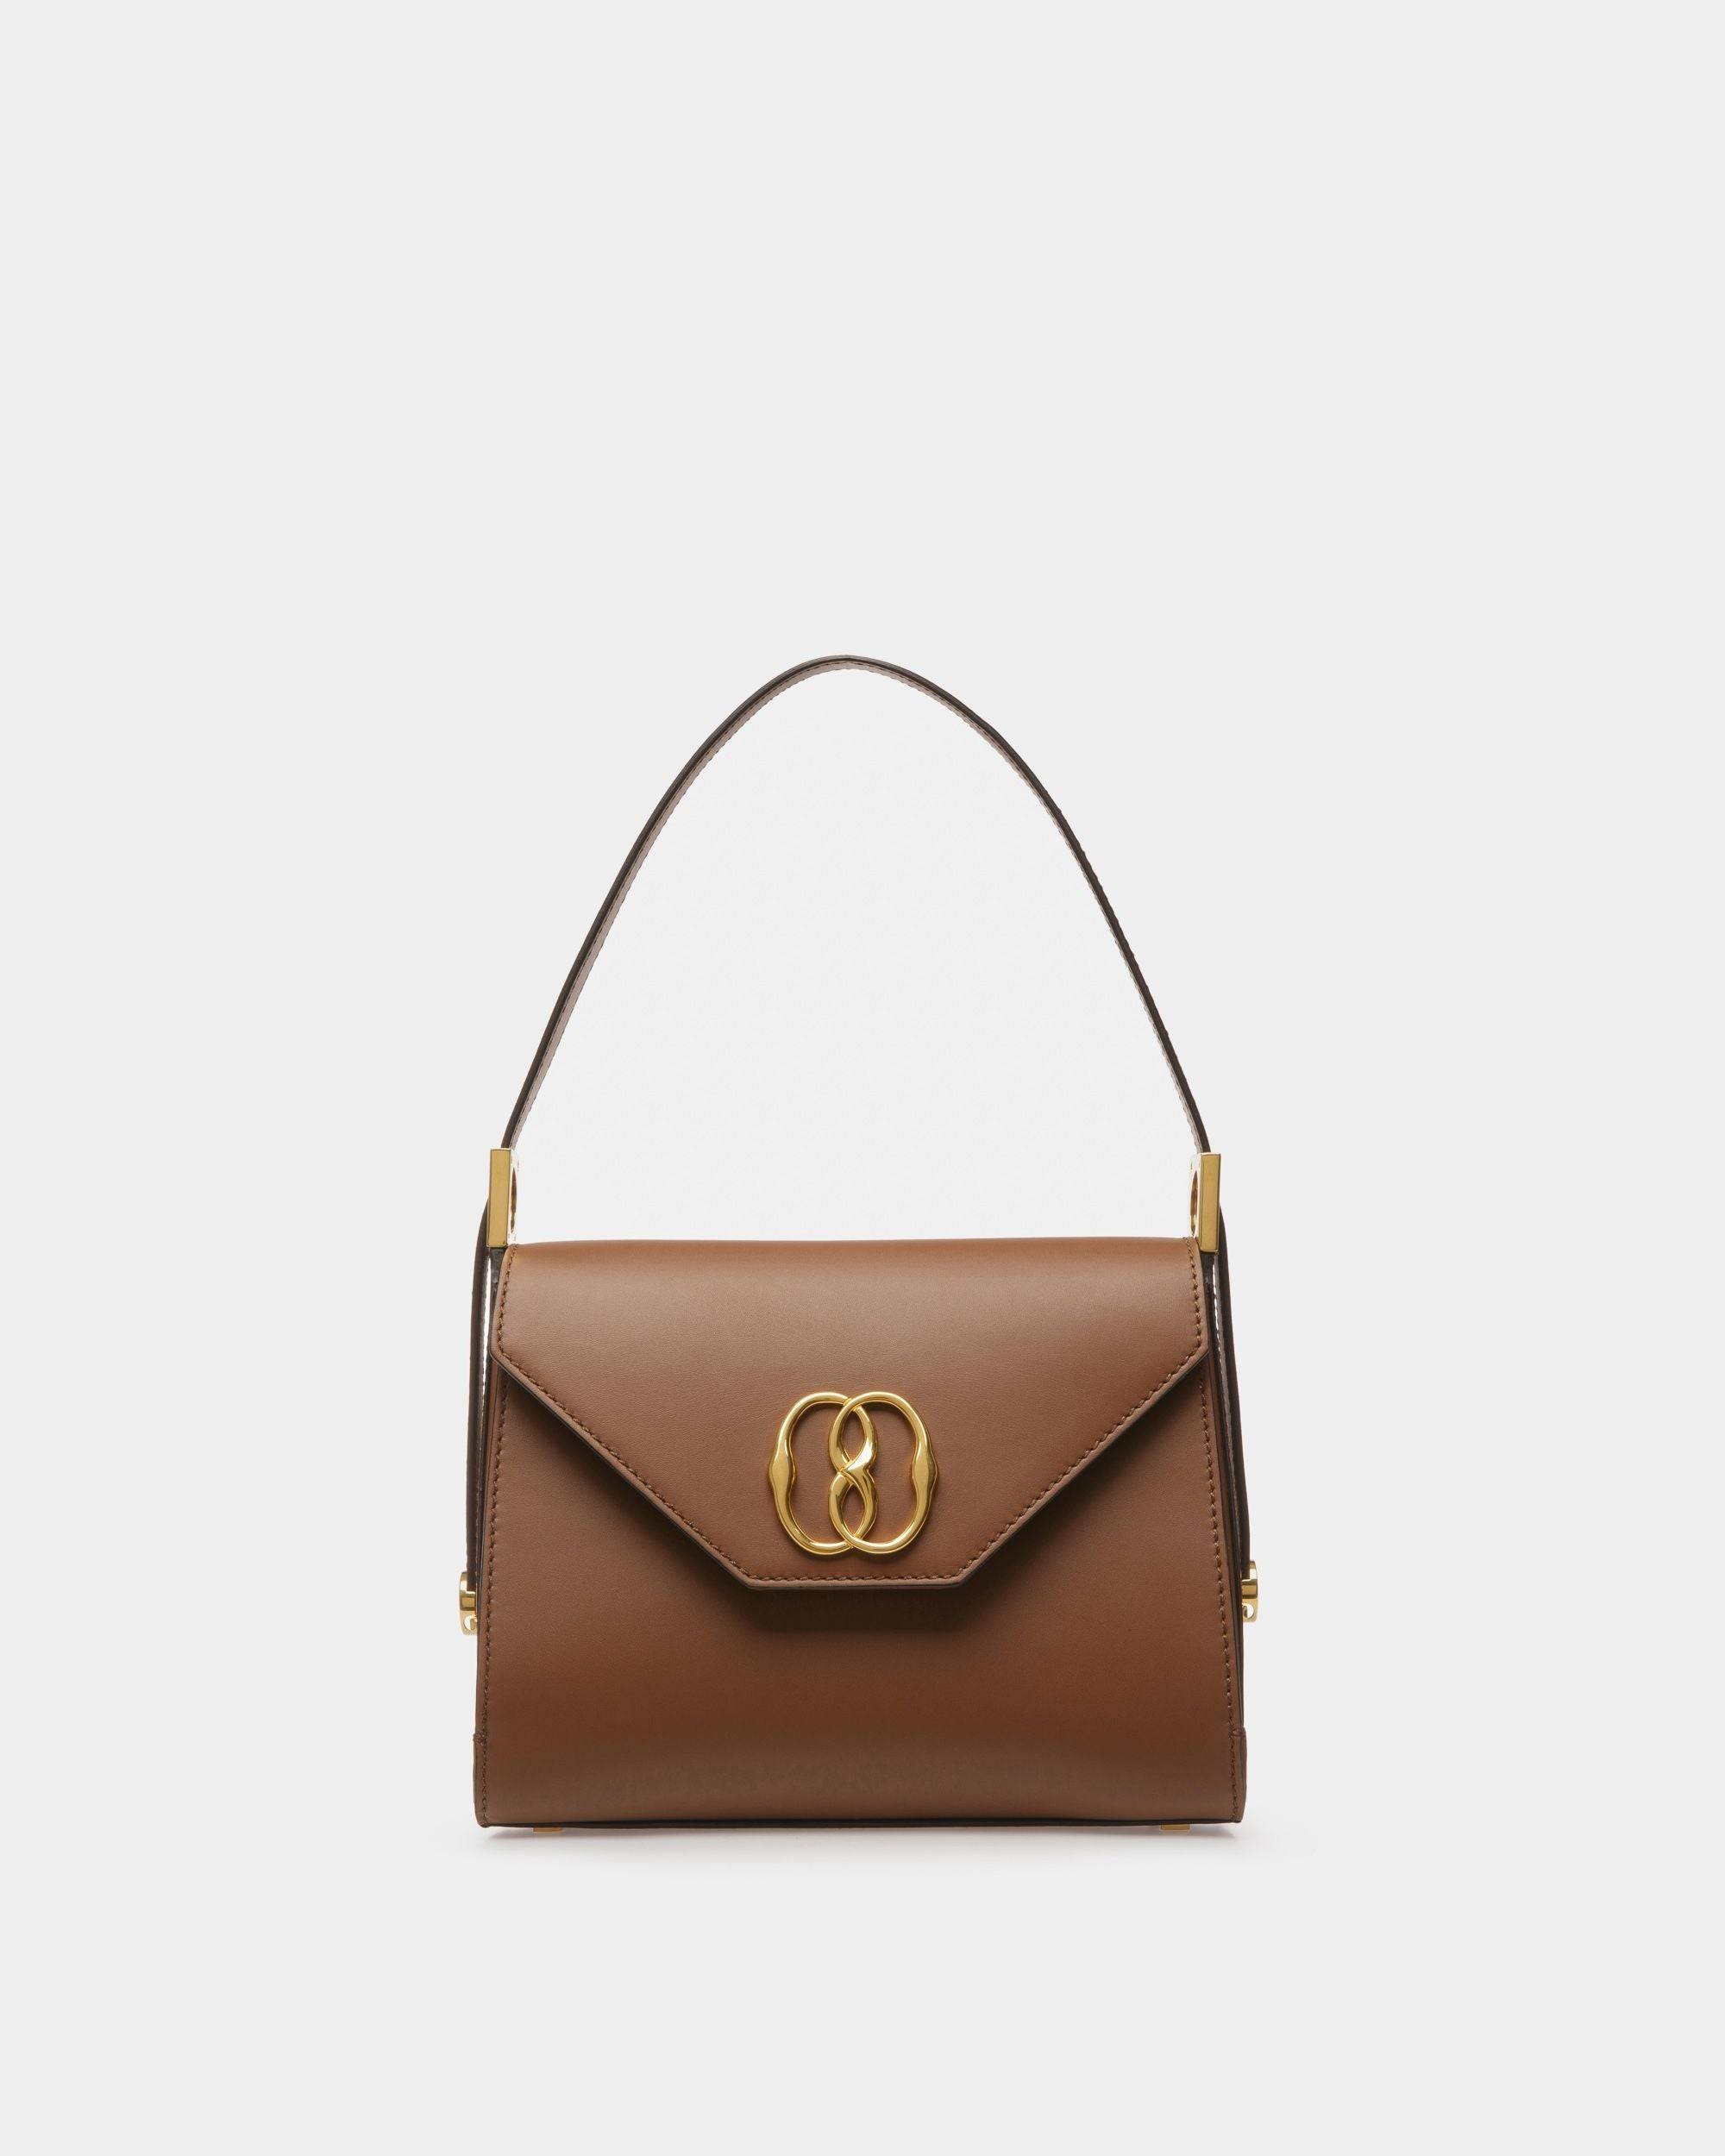 Emblem Trapeze | Women's Top Handle Purse | Brown Leather | Bally | Still Life Front